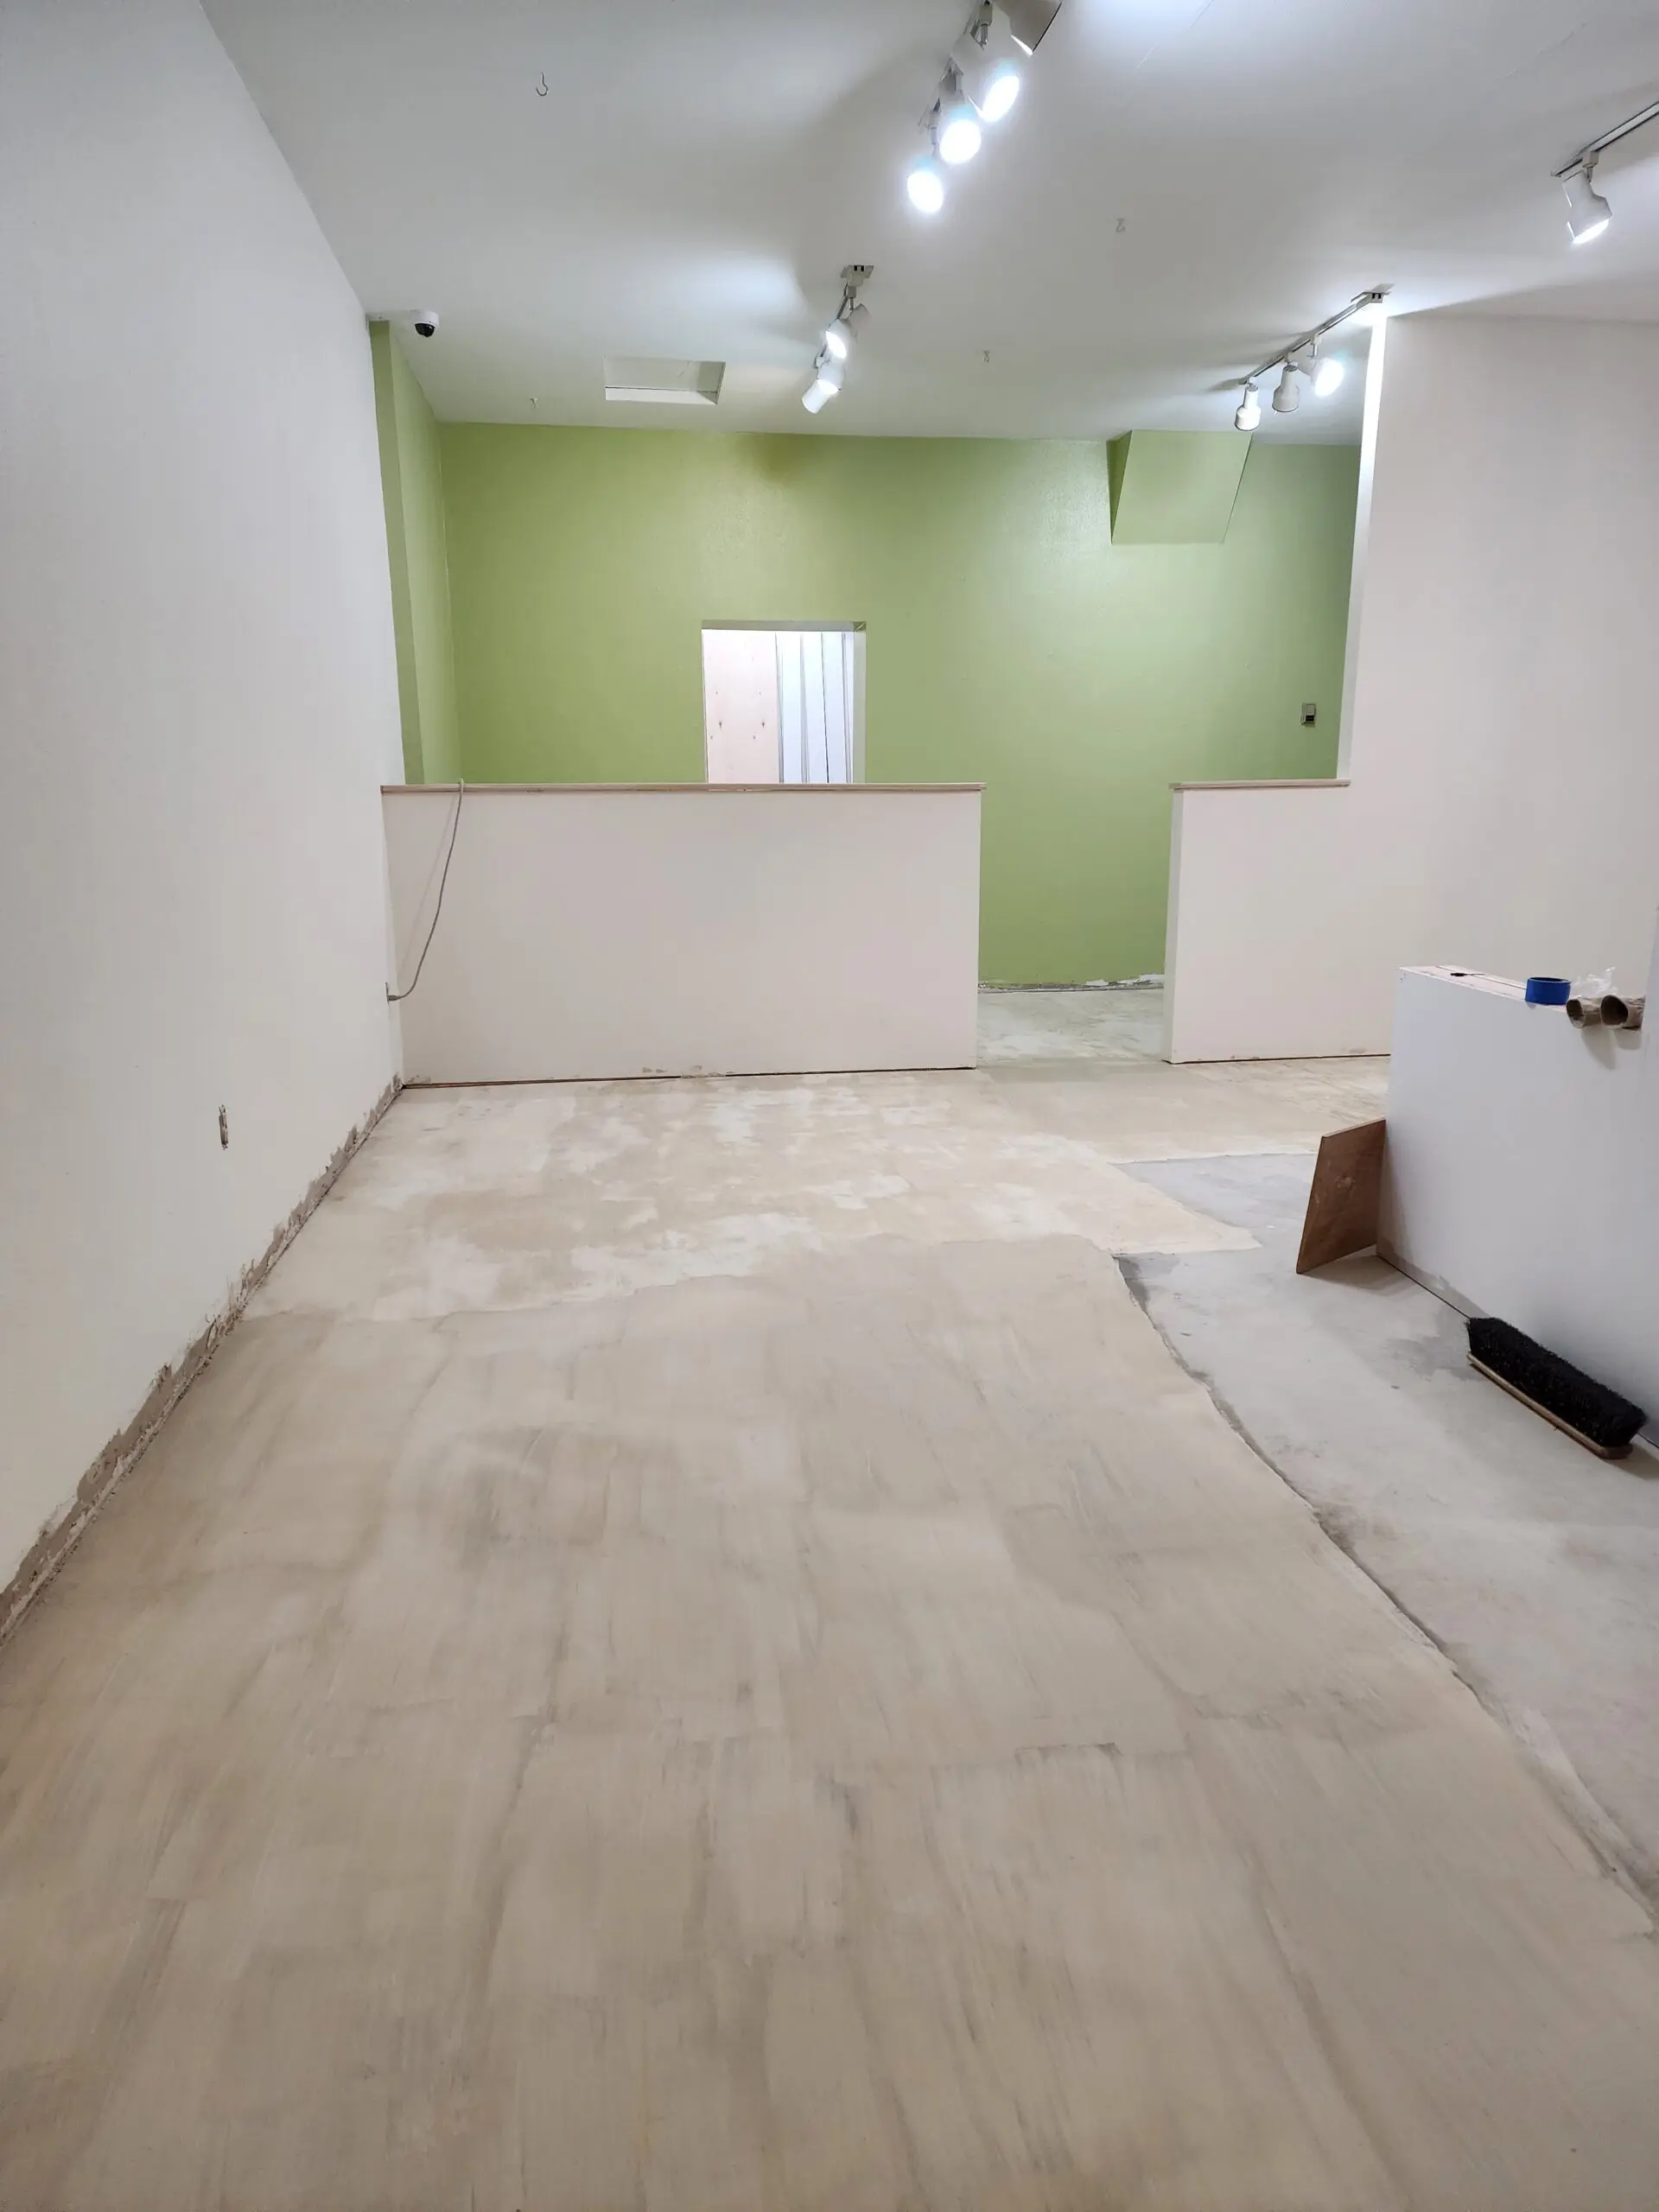 Retail space concrete floor with cream beige pigmented overlay applied using a chip brush